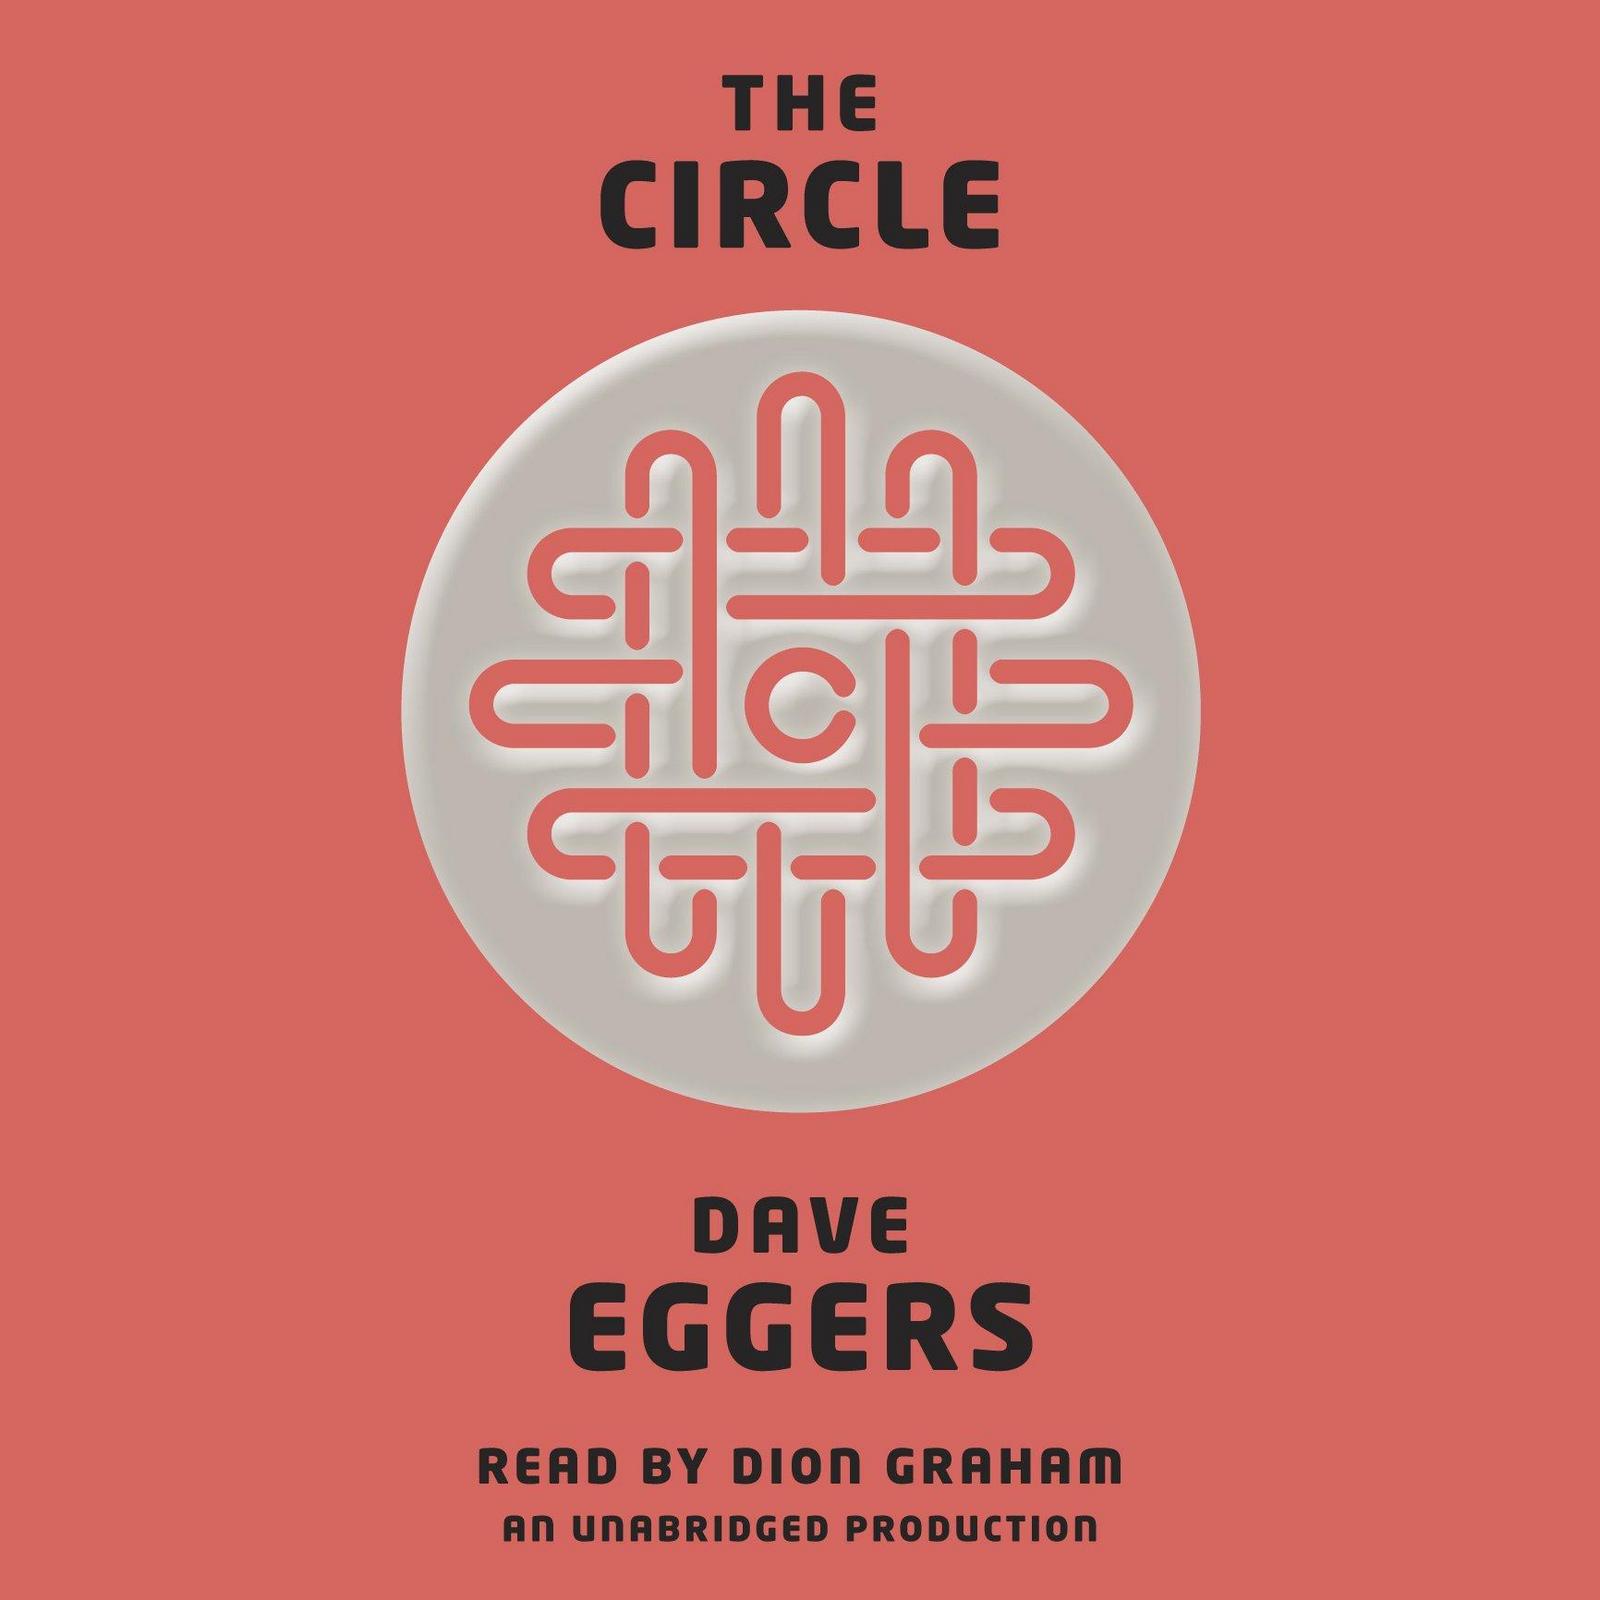 Dave Eggers, Dave Eggers: The Circle (Hardcover, 2013, Alfred A. Knopf / McSweeny's Books)